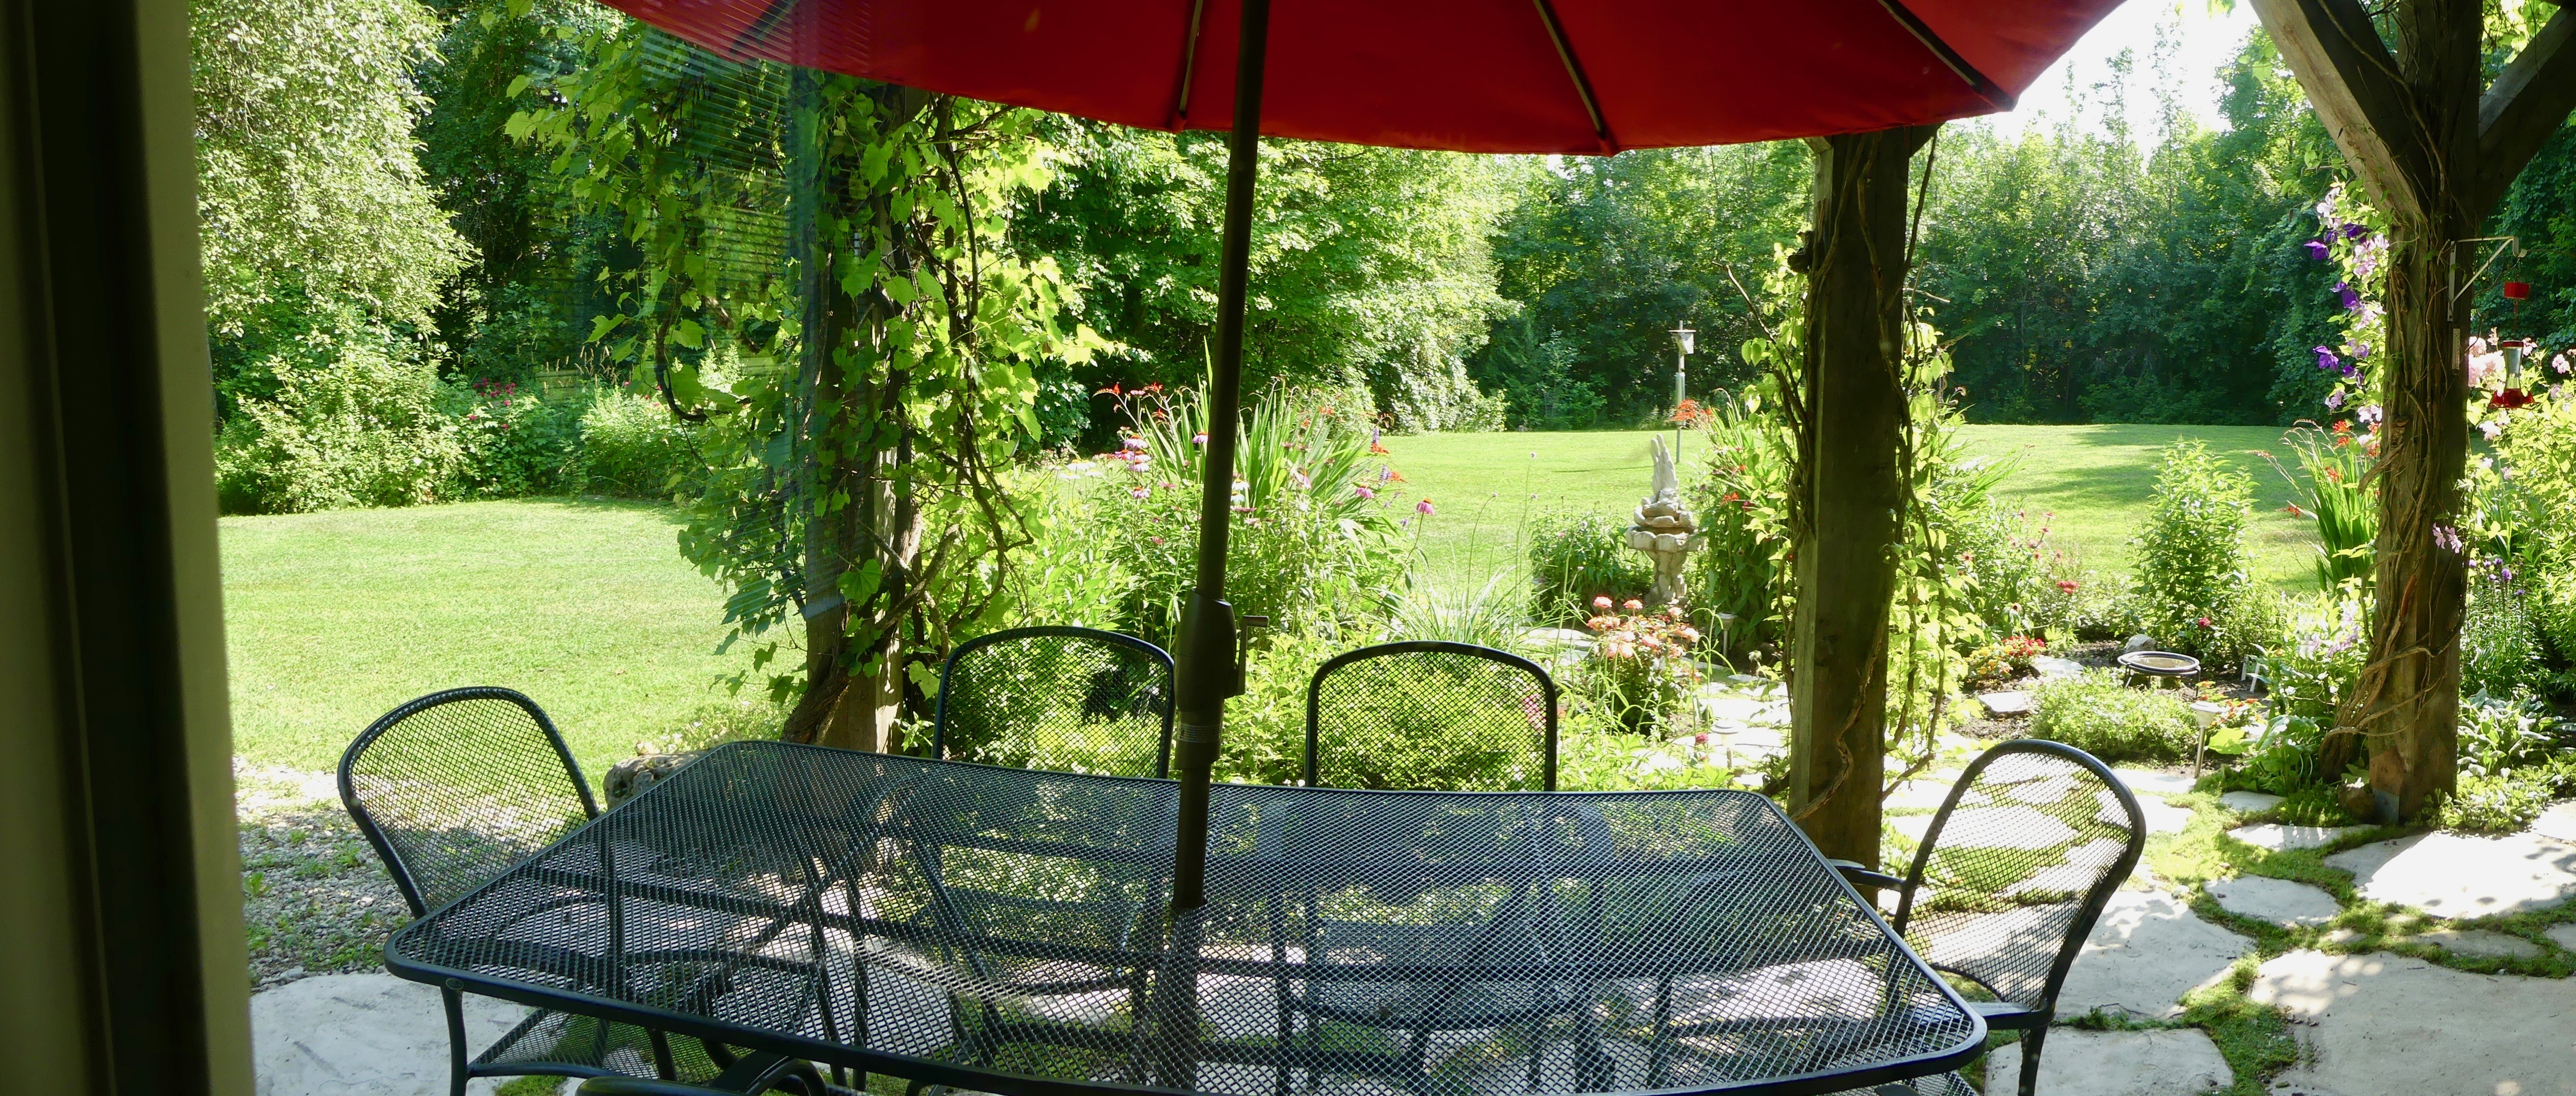 A view of the gardens from the patio